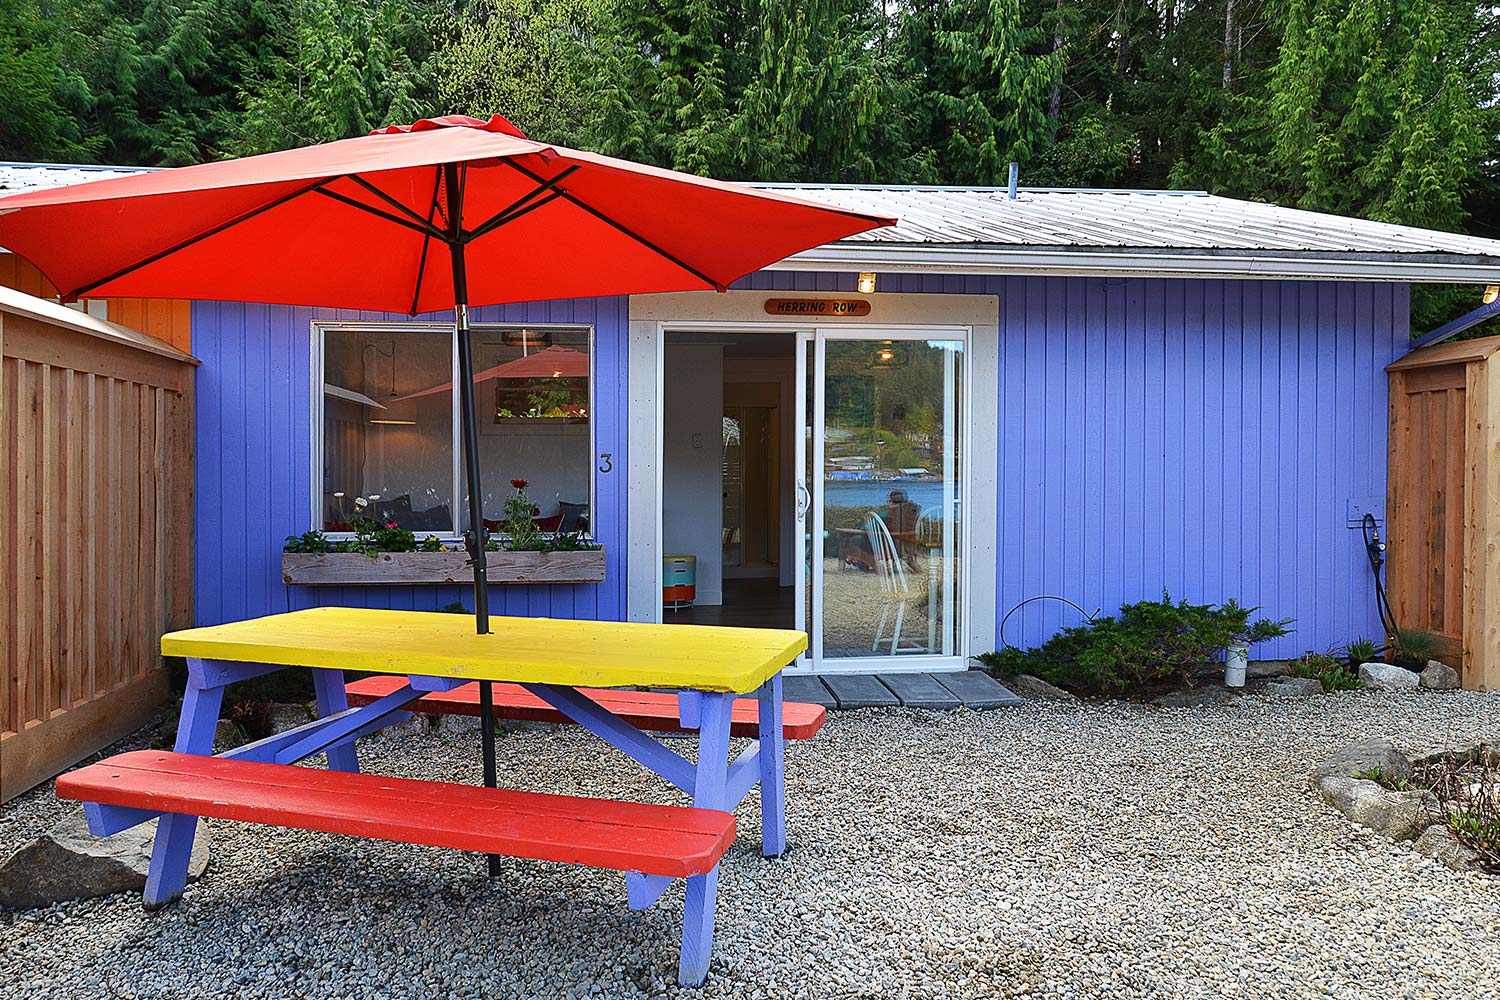 The front yard of Herring Row has a BBQ & picnic table. This purple cottage is one of 4 charming cottages at John Henry’s.